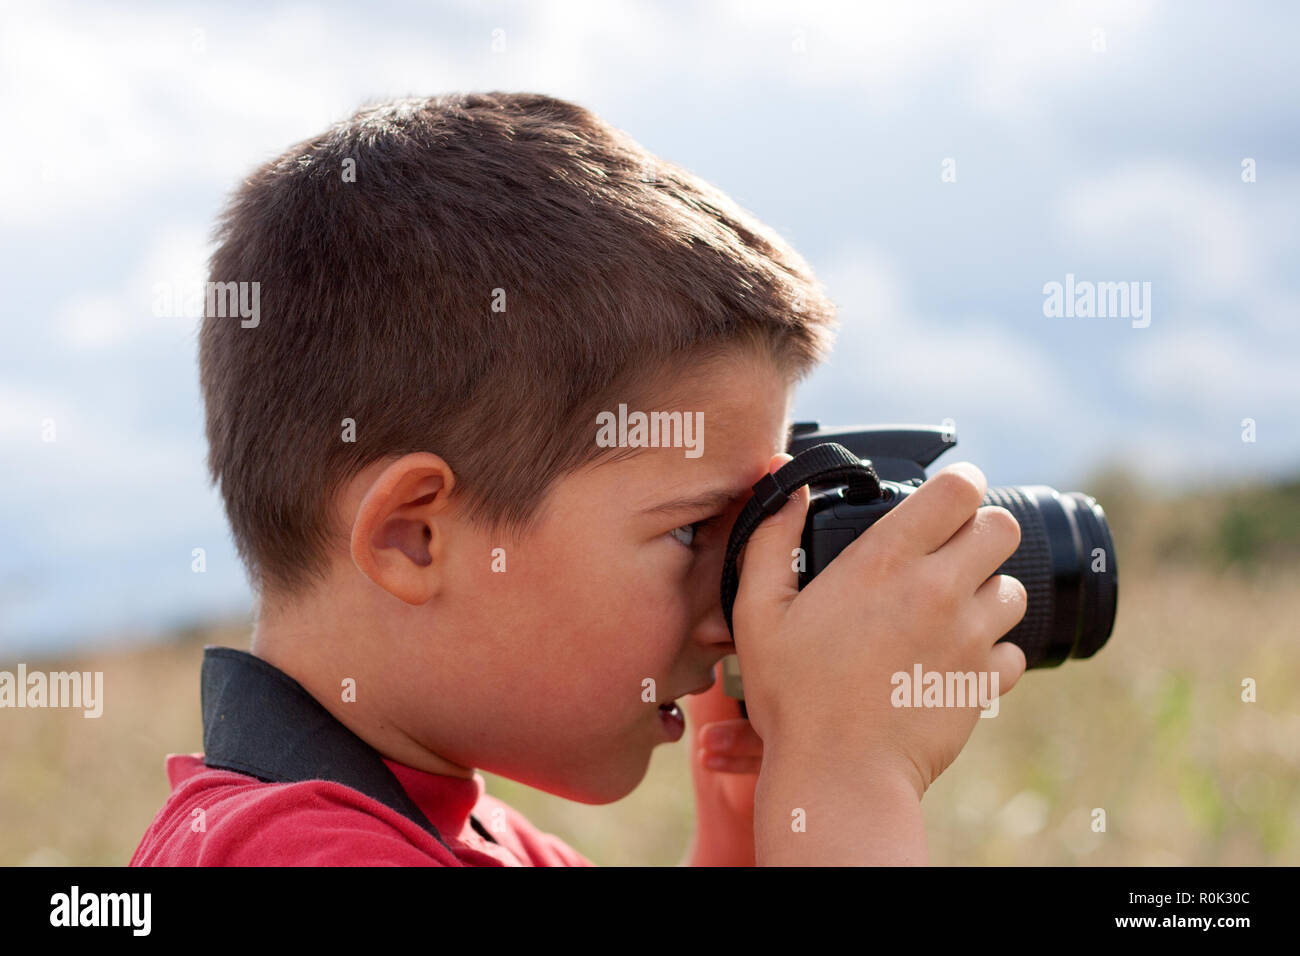 A portrait of a young boy, taking photos Stock Photo